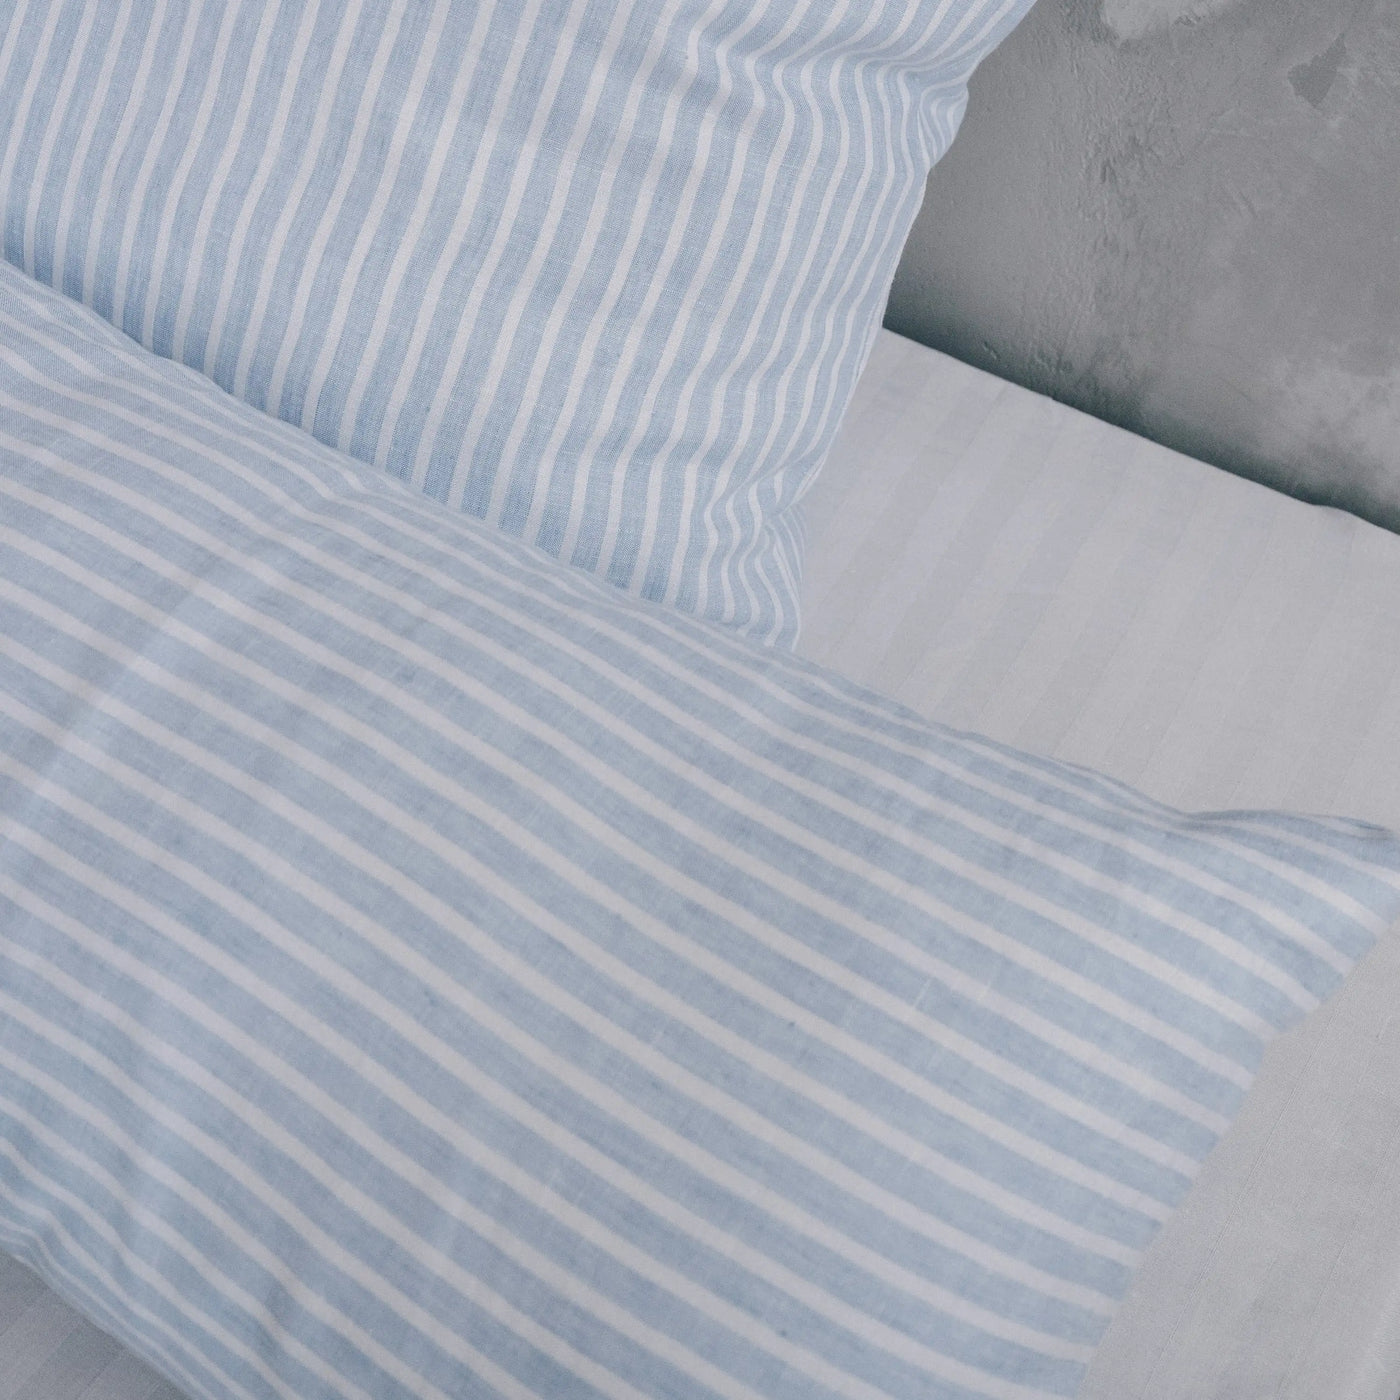 Shop Pure Linen Bedding Set 135x200 in Blue with White Stripes 4